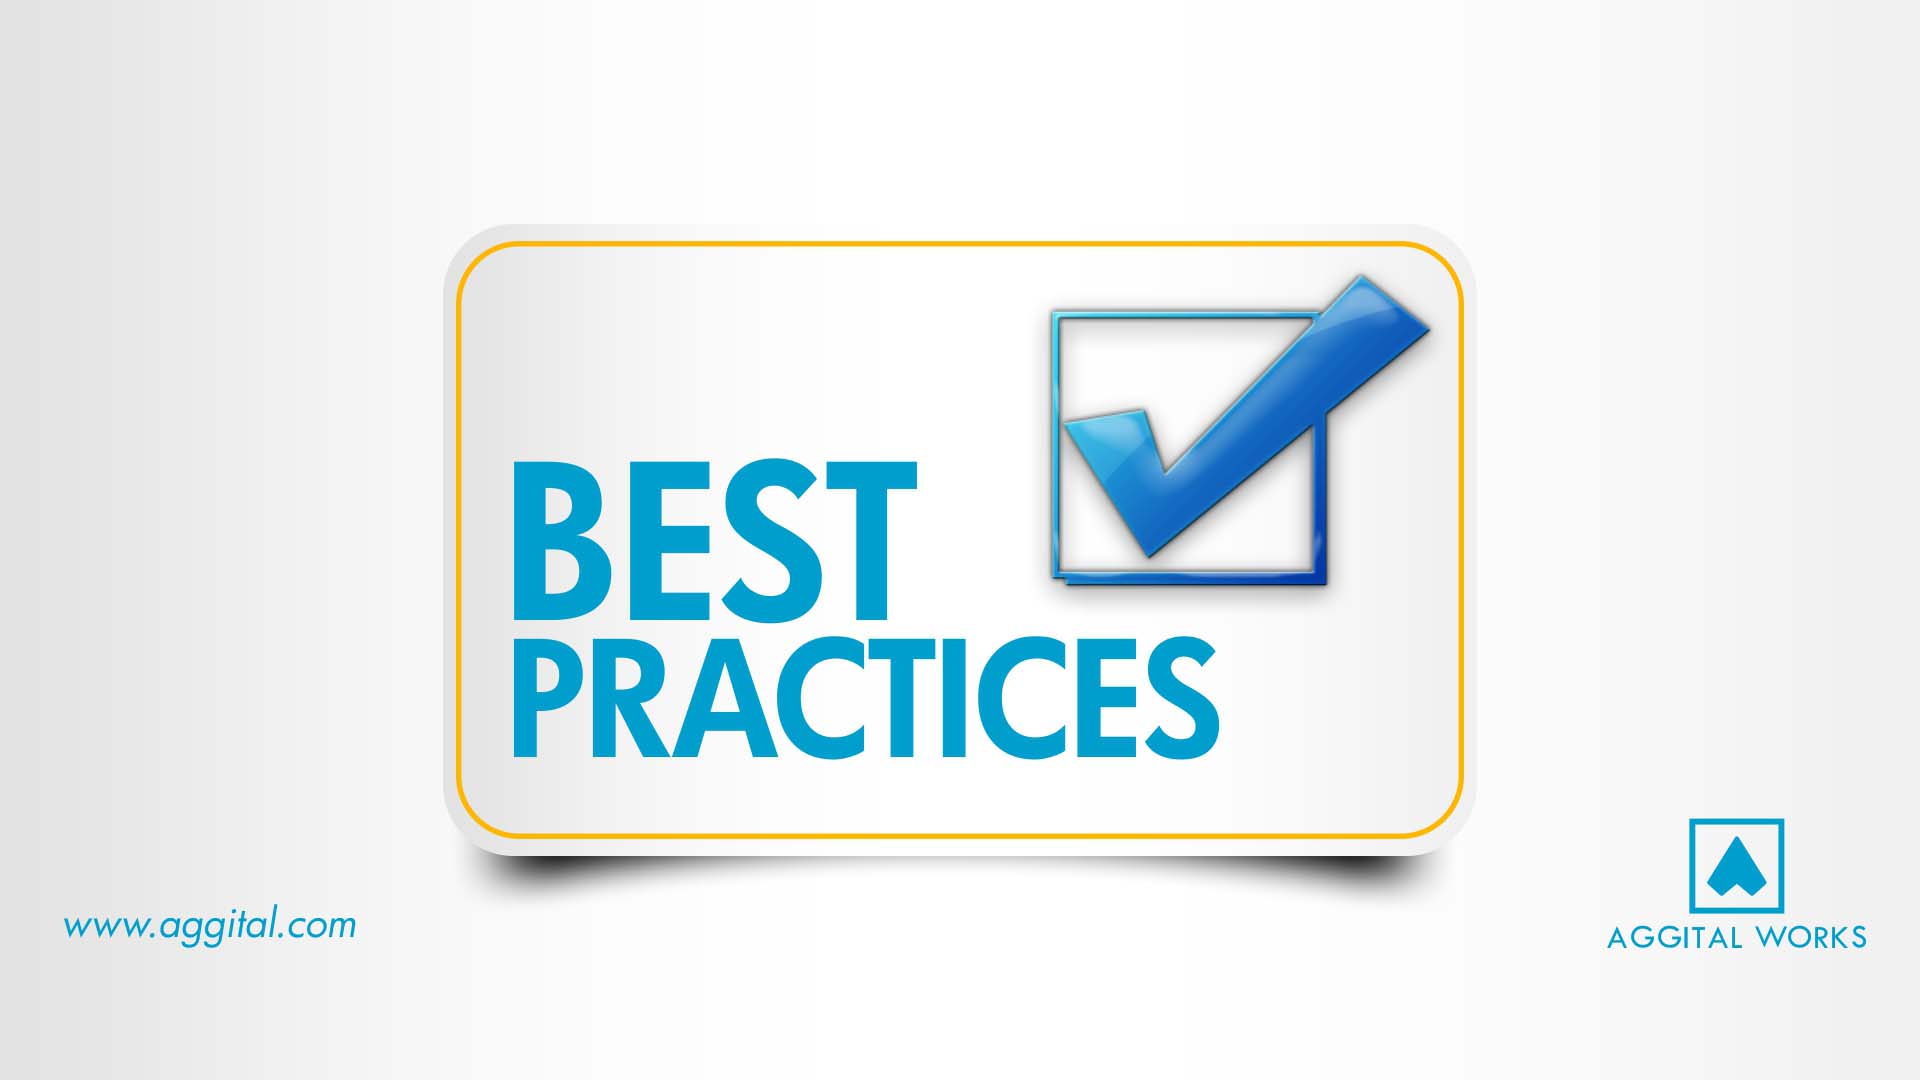 Want To Know The Truth About Best Practices? Read This!